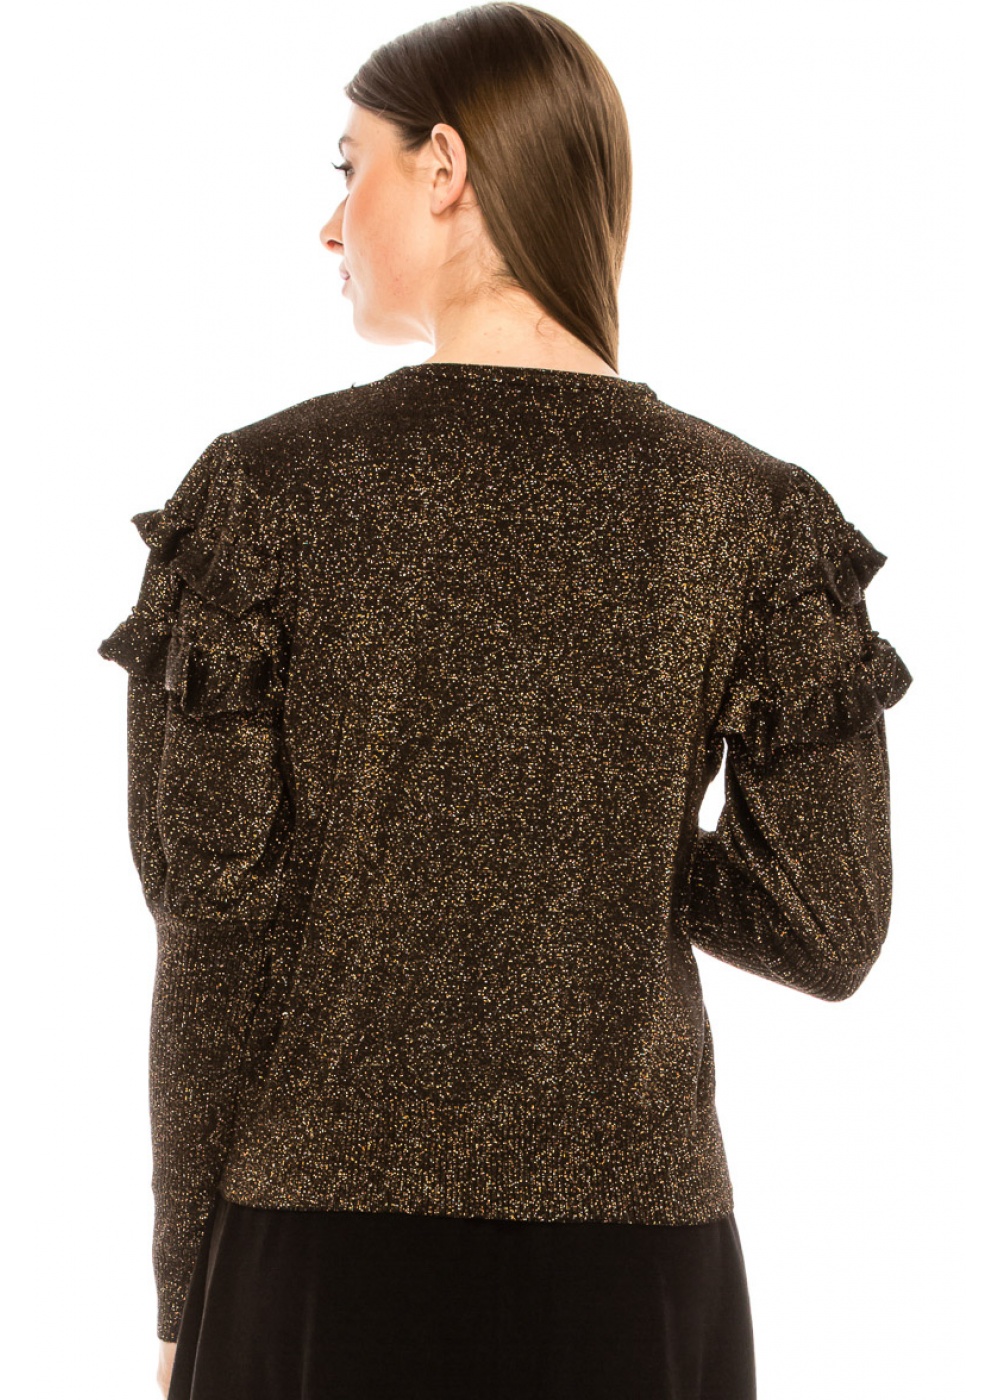 Gold lurex sweater with ruffle detail